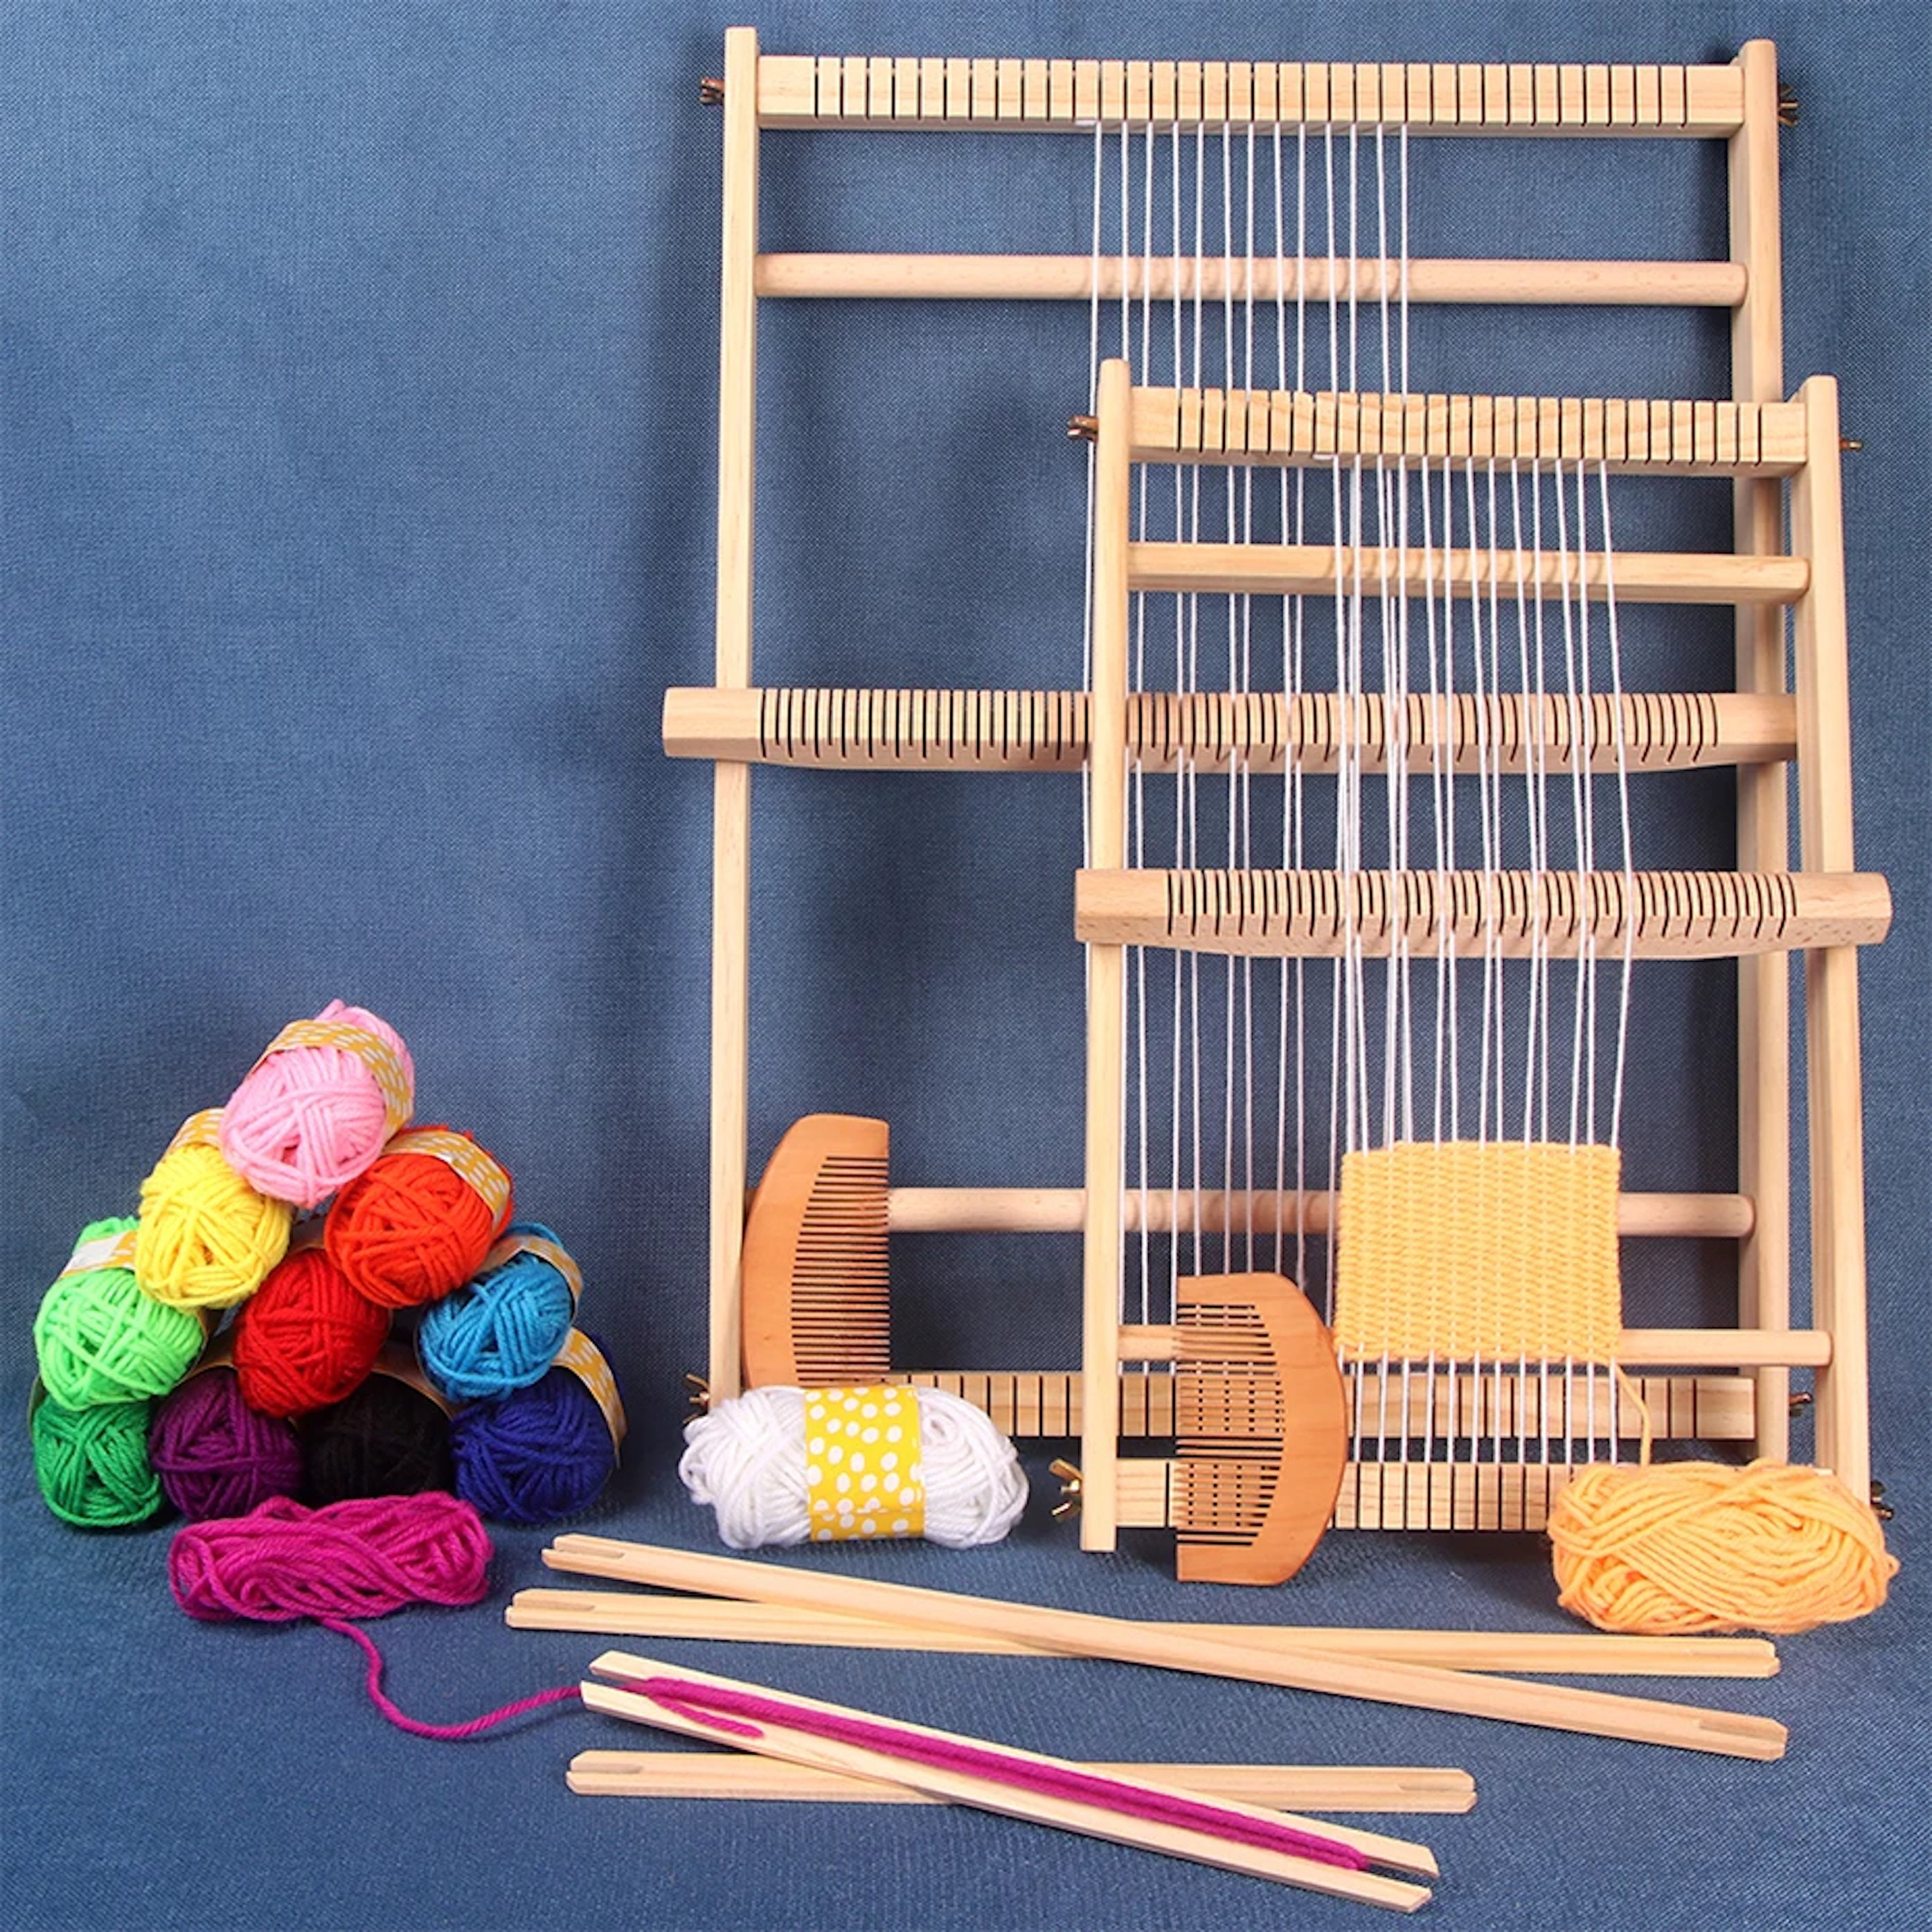 X Large Weaving Loom Kit, Also Known as Tapestry Weave Loom Lap